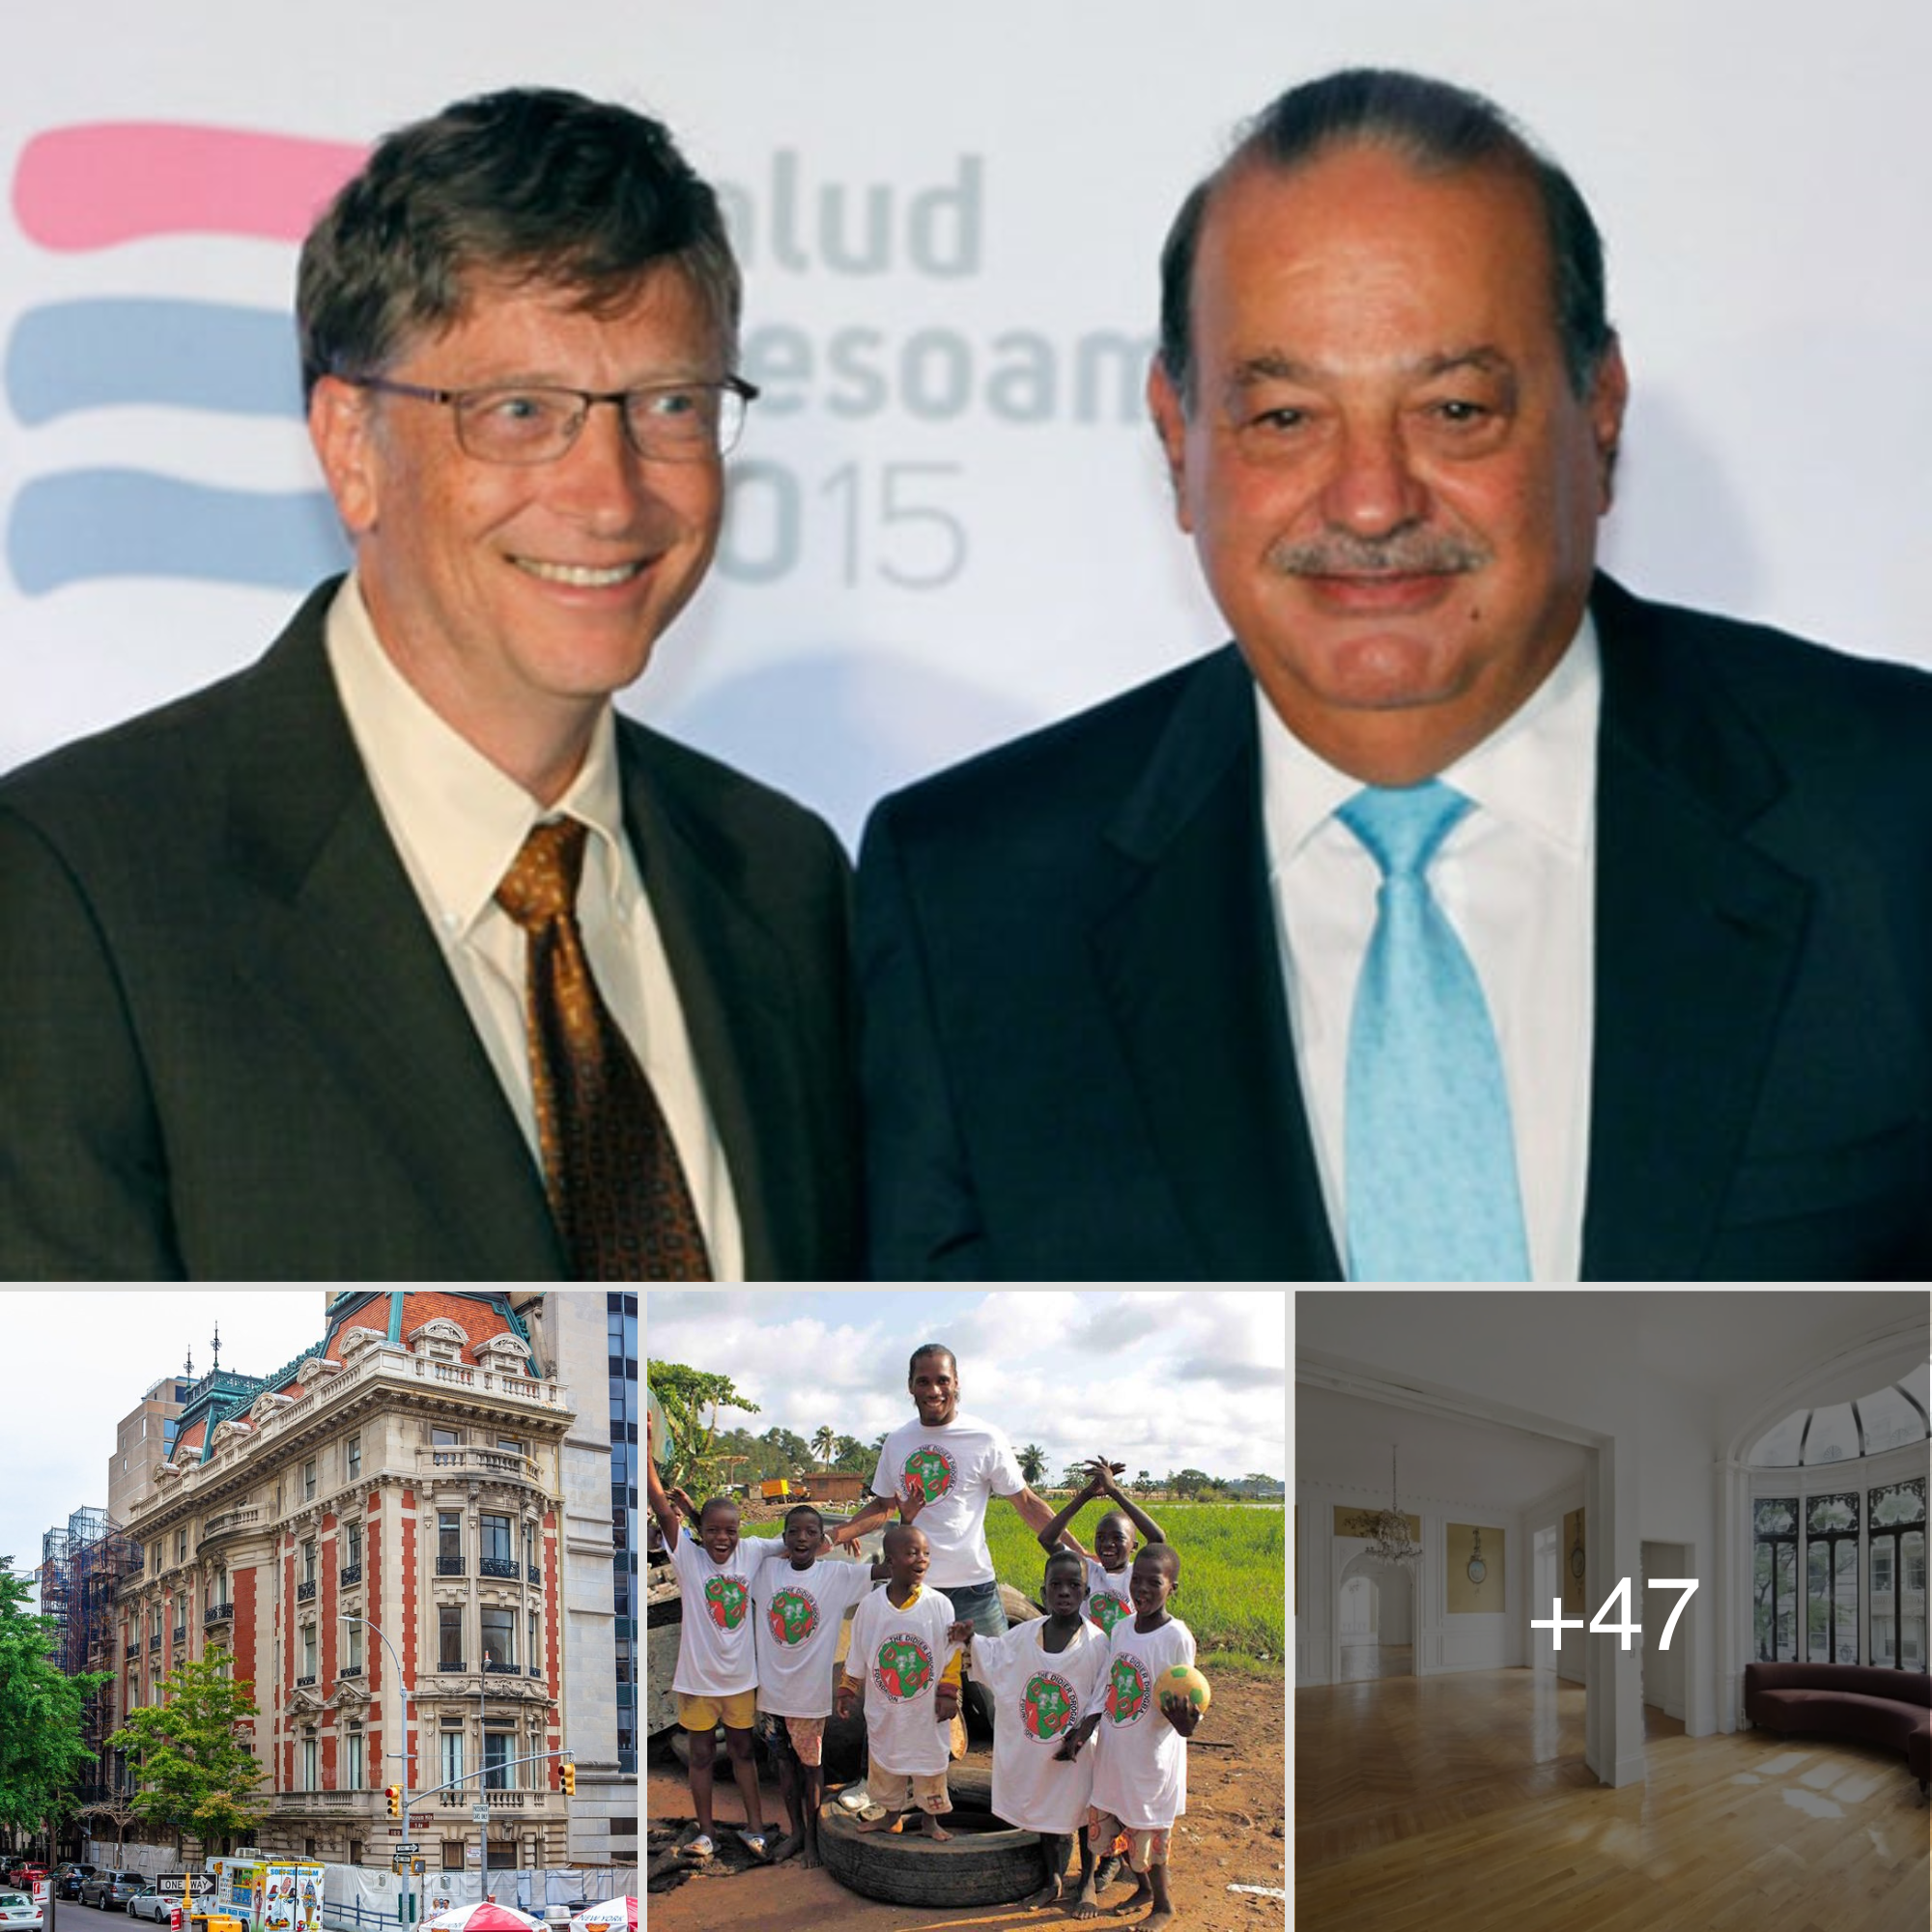 Mexico’s richest man offers $80M for NYC’s largest townhouse to live comfortably and charity